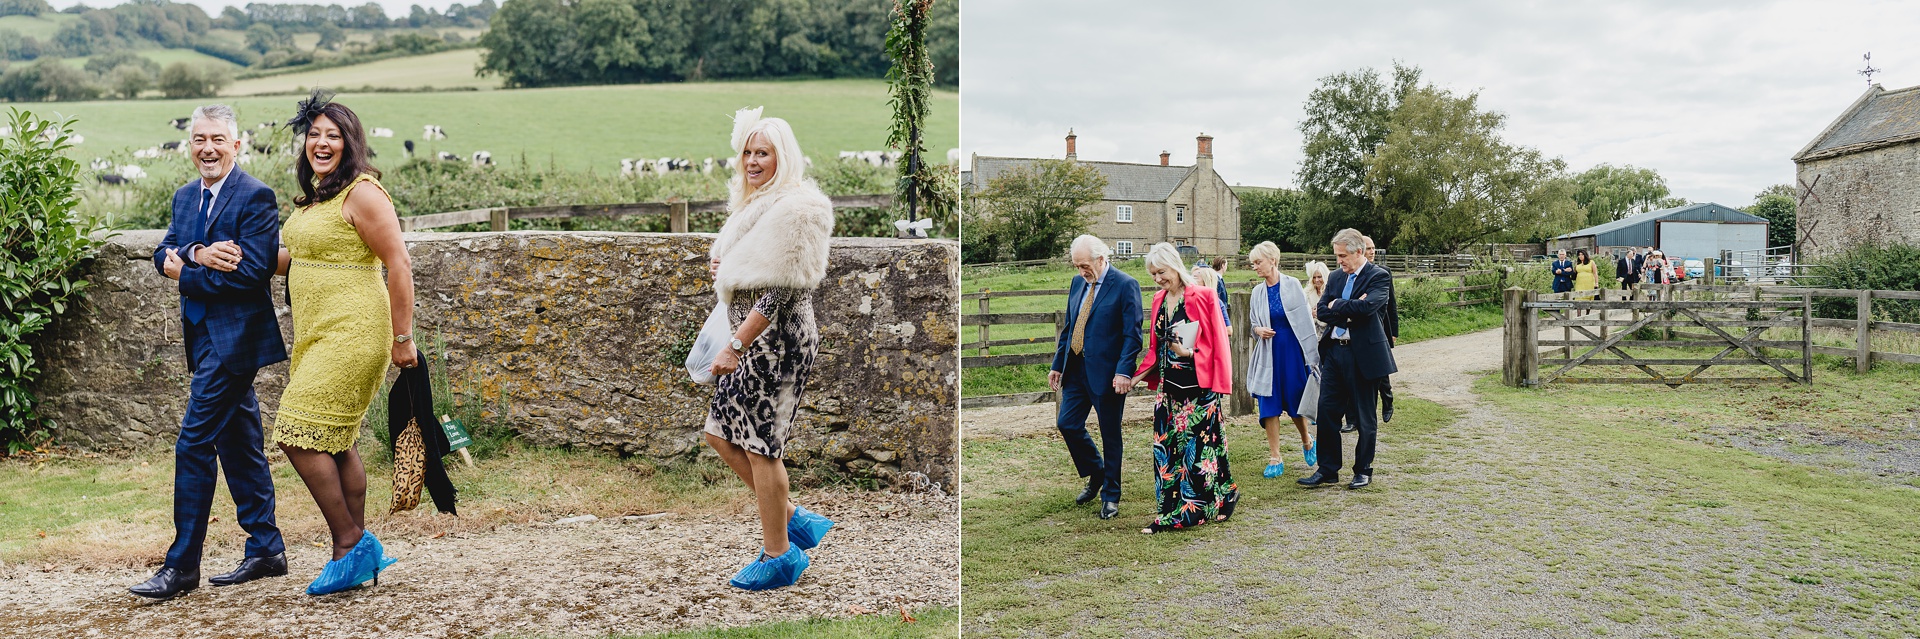 Wedding guests arriving at a rural church with plastic covers on their shoes